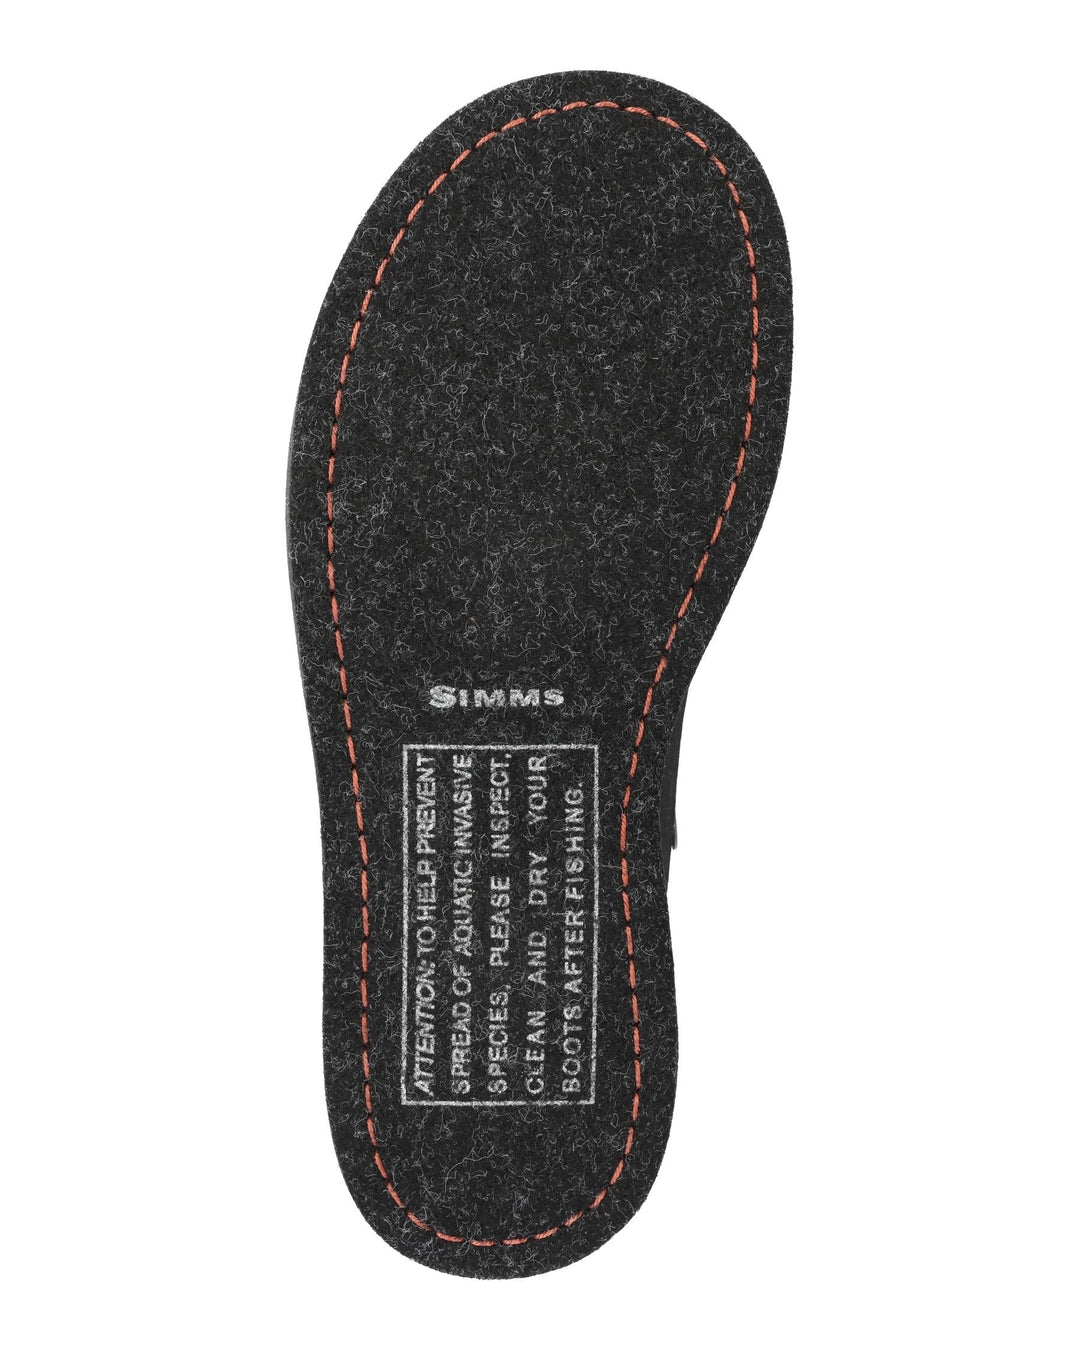 Simms - M's G3 Guide Wading Boots - Slate - Felt Sole